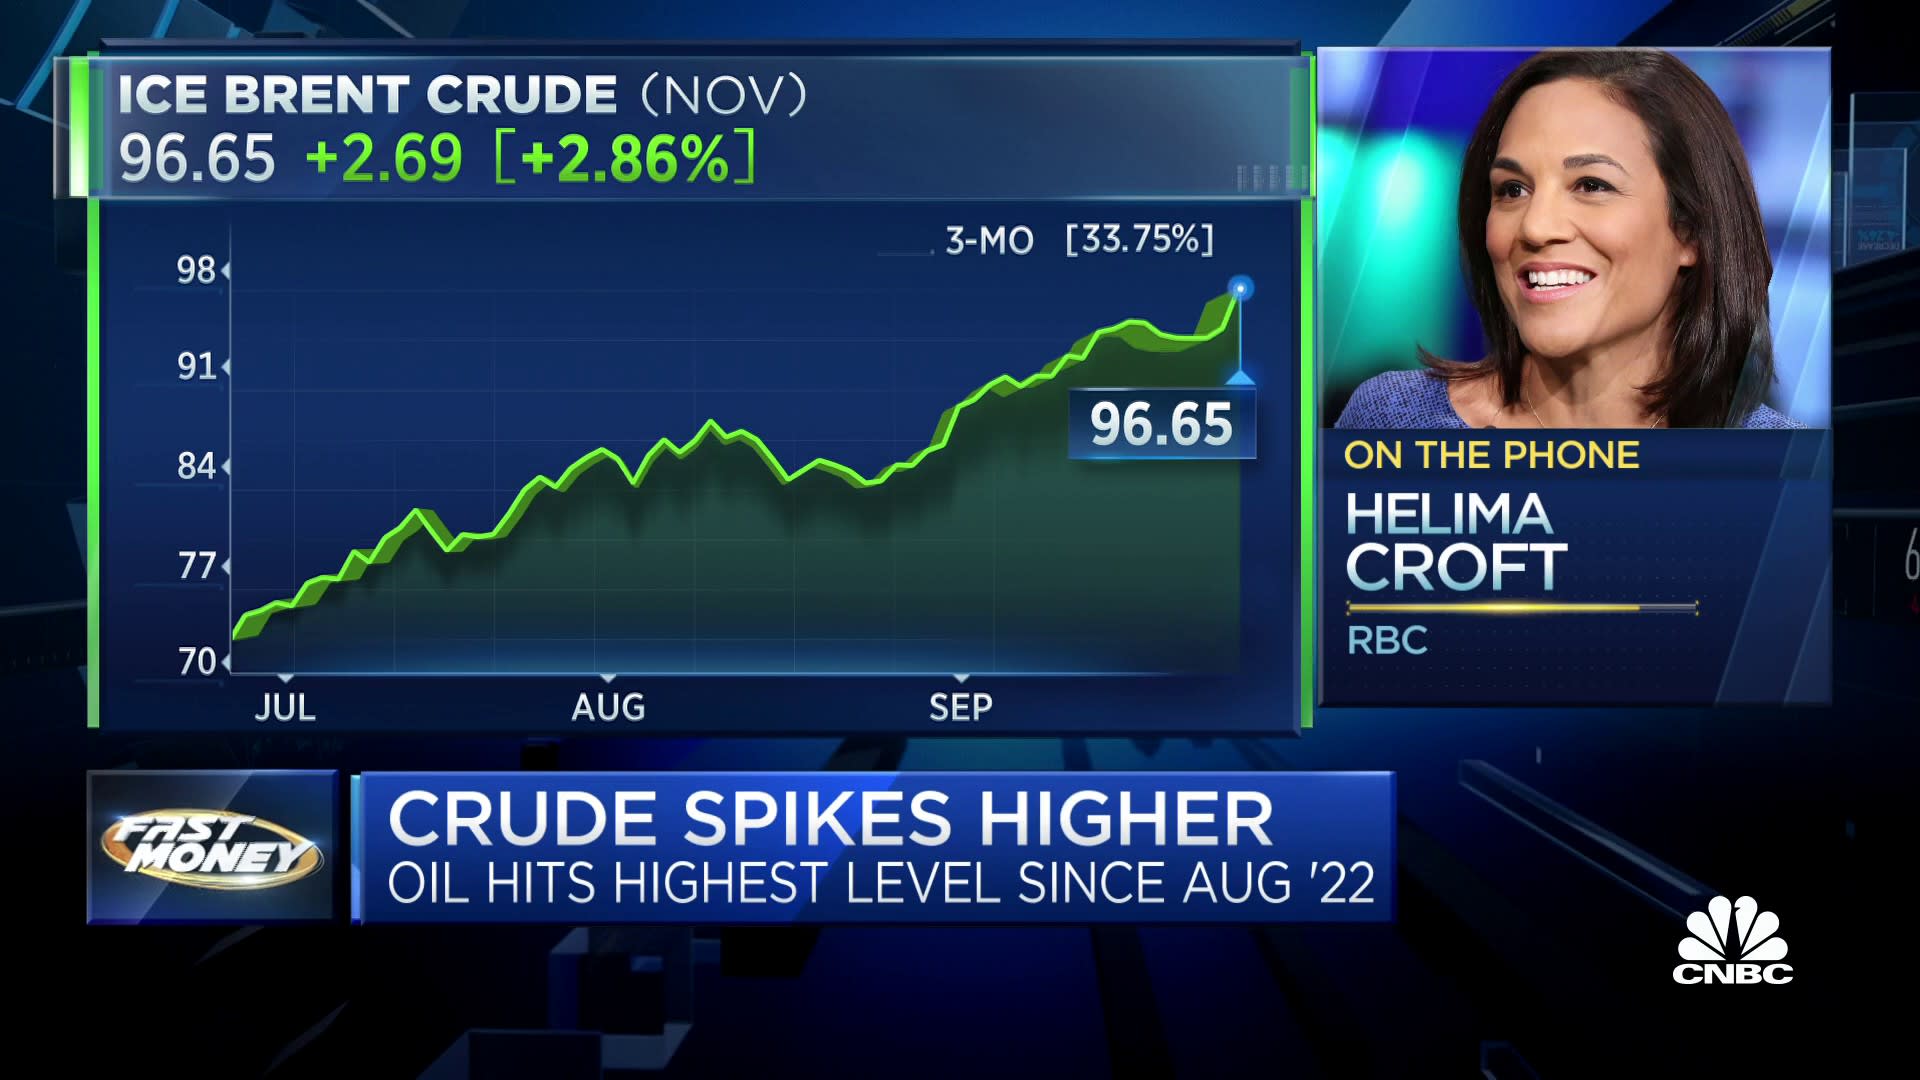 It's not clear where the White House goes next to alleviate oil prices, says RBC's Helima Croft